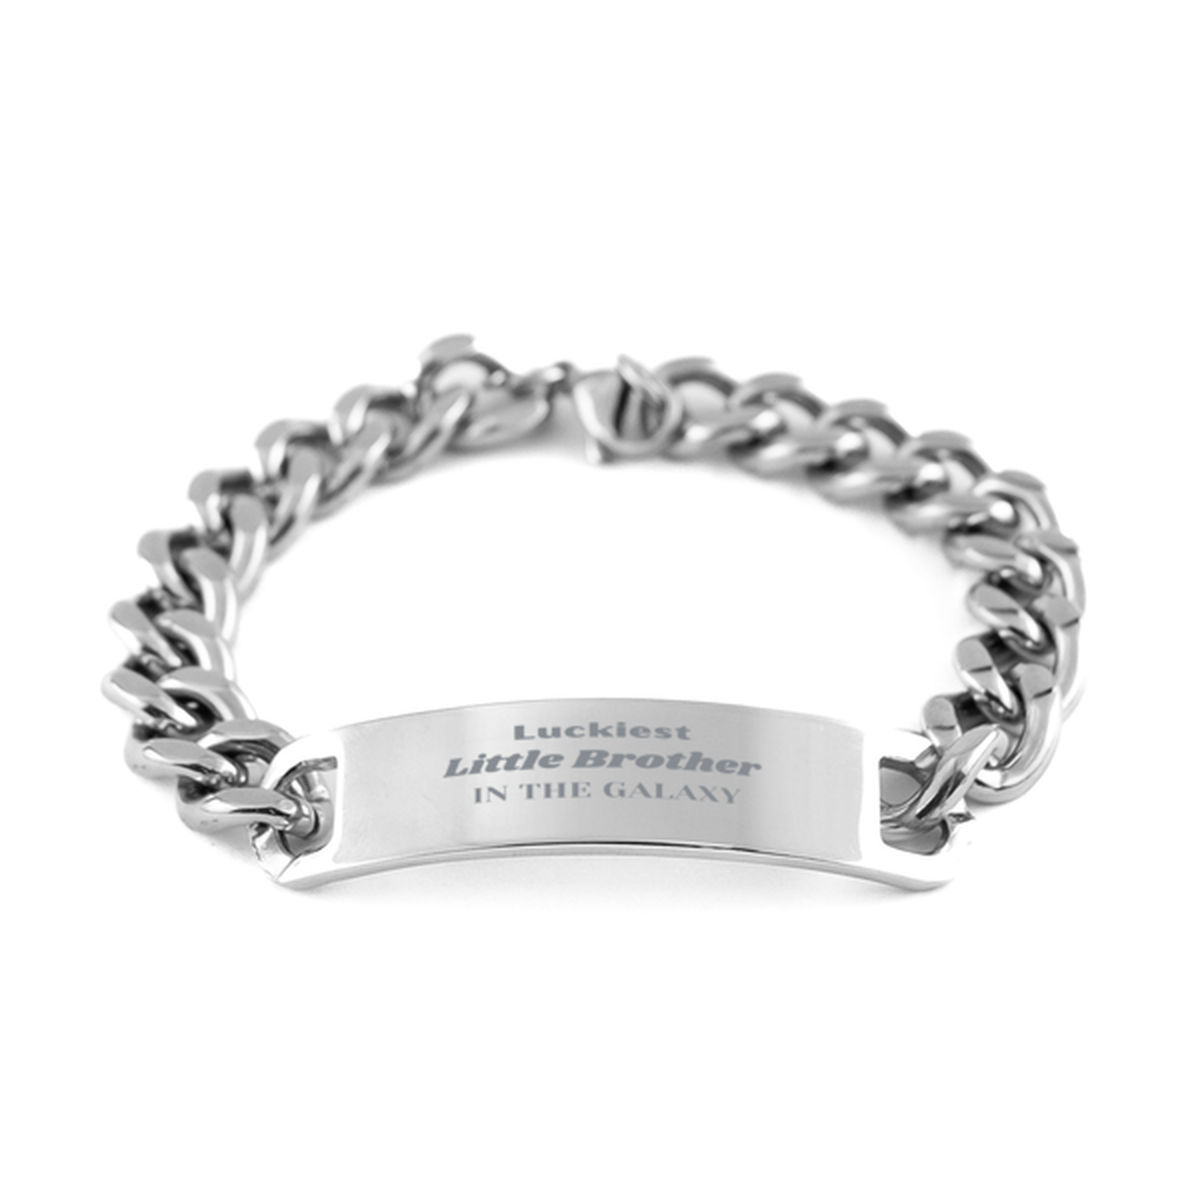 Luckiest Little Brother in the Galaxy, To My Little Brother Engraved Gifts, Christmas Little Brother Cuban Chain Stainless Steel Bracelet Gifts, X-mas Birthday Unique Gifts For Little Brother Men Women